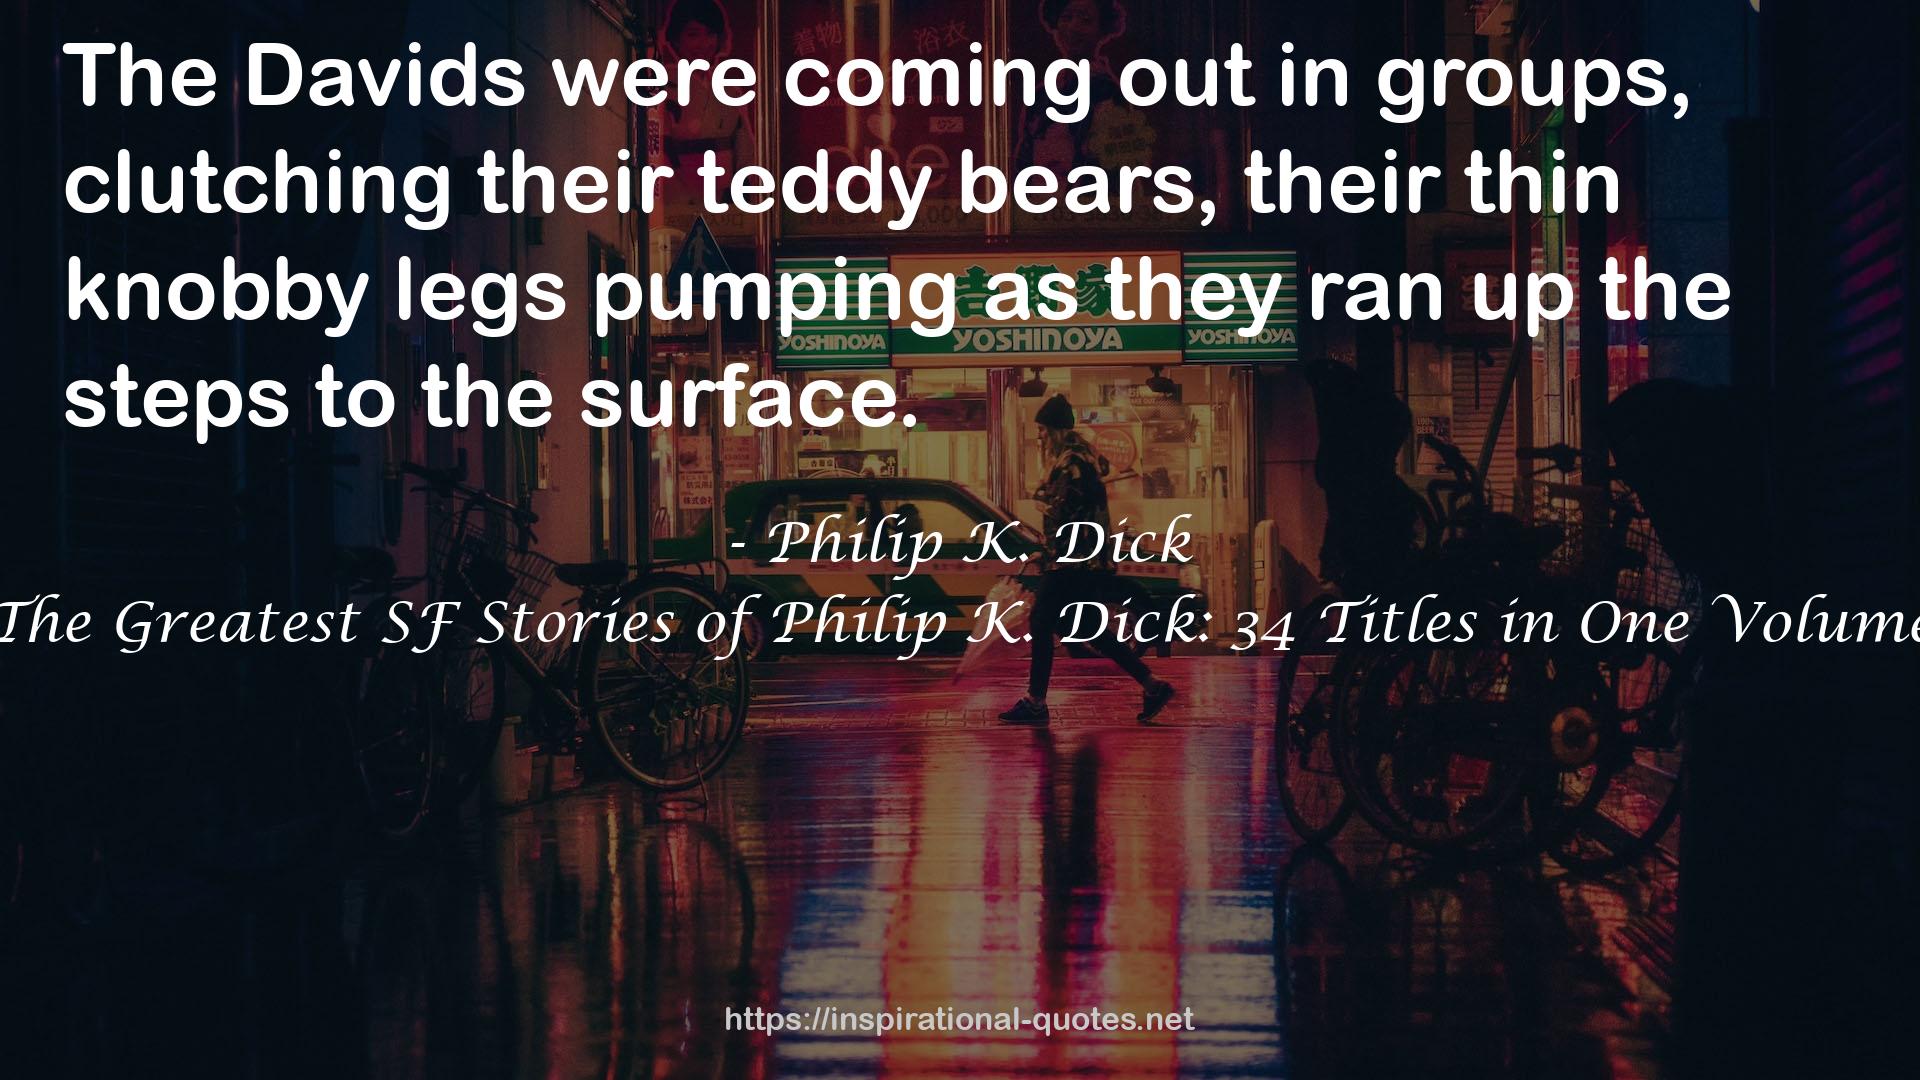 The Greatest SF Stories of Philip K. Dick: 34 Titles in One Volume QUOTES